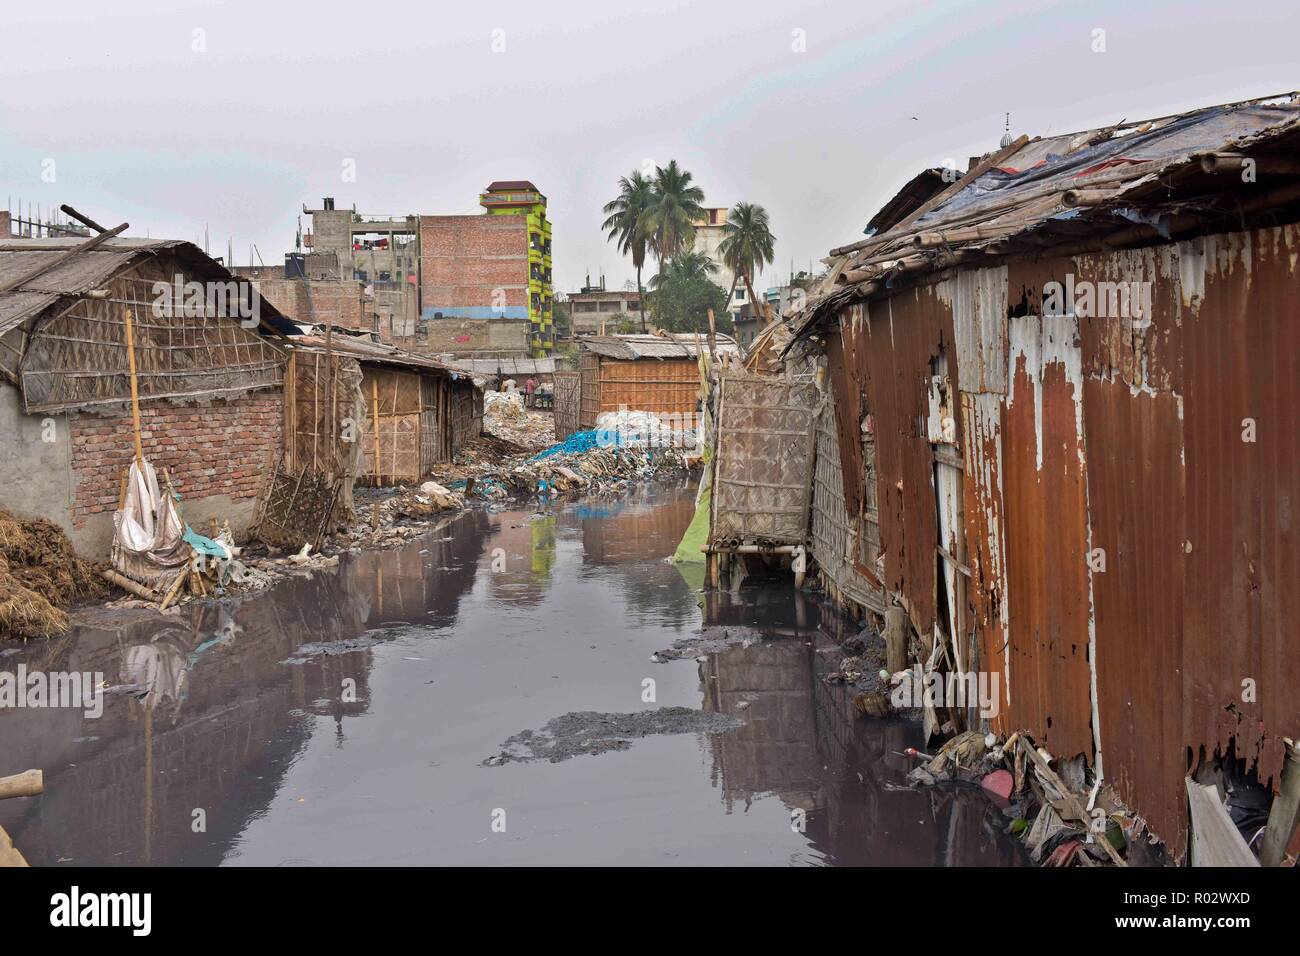 Dhaka, Bangladesh - March 06, 2017: A canal polluted by waste and untreated chemical discharges from tanneries at Hazaribagh in Dhaka. Stock Photo